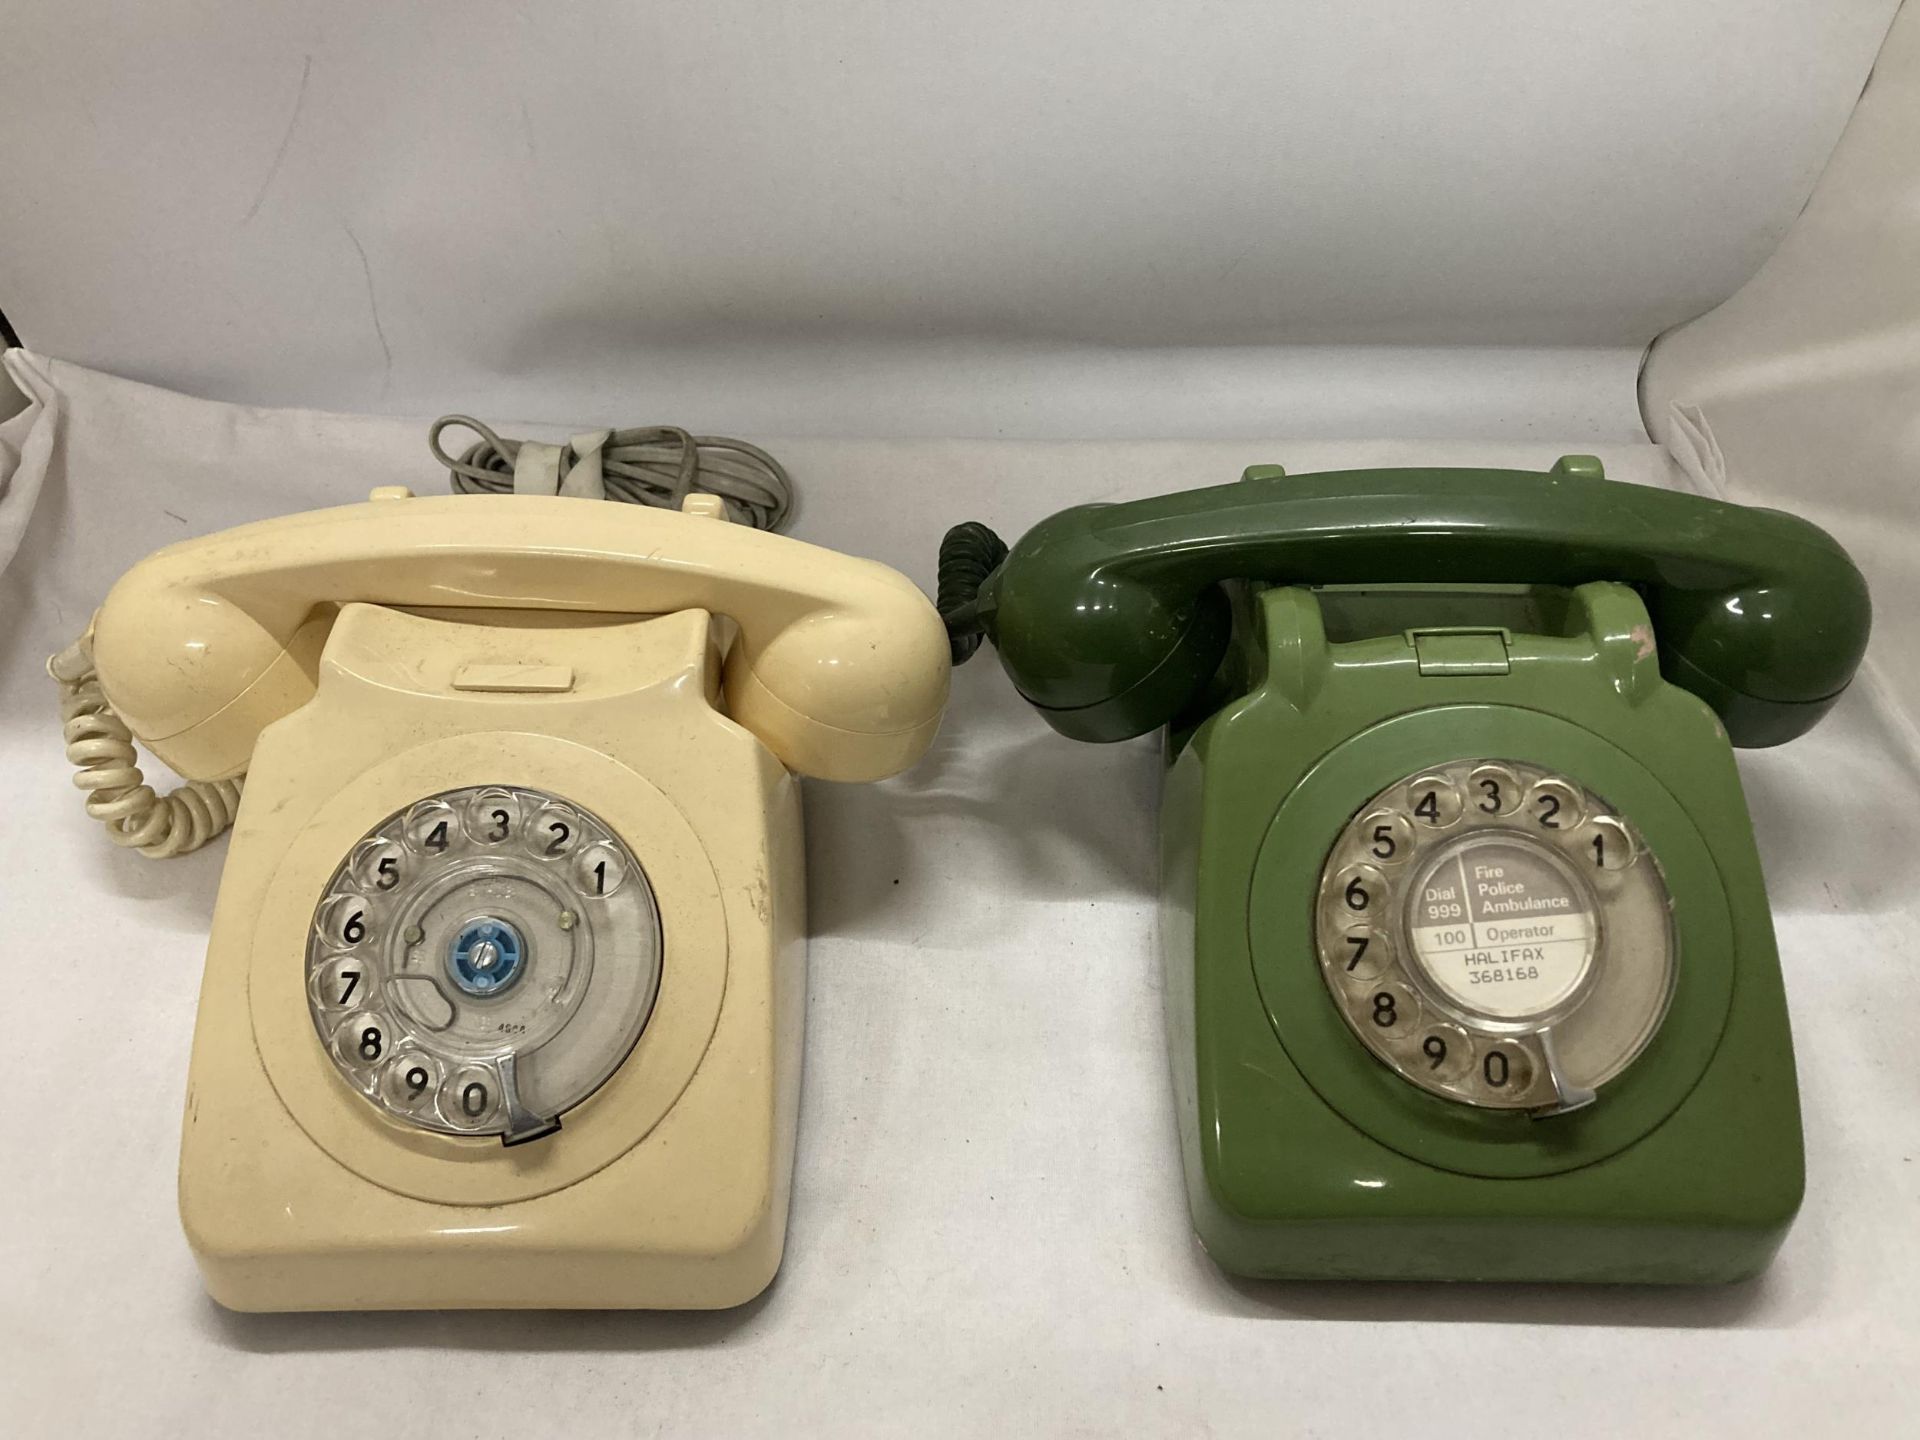 TWO VINTAGE DIAL UP TELEPHONES - CREAM AND GREEN